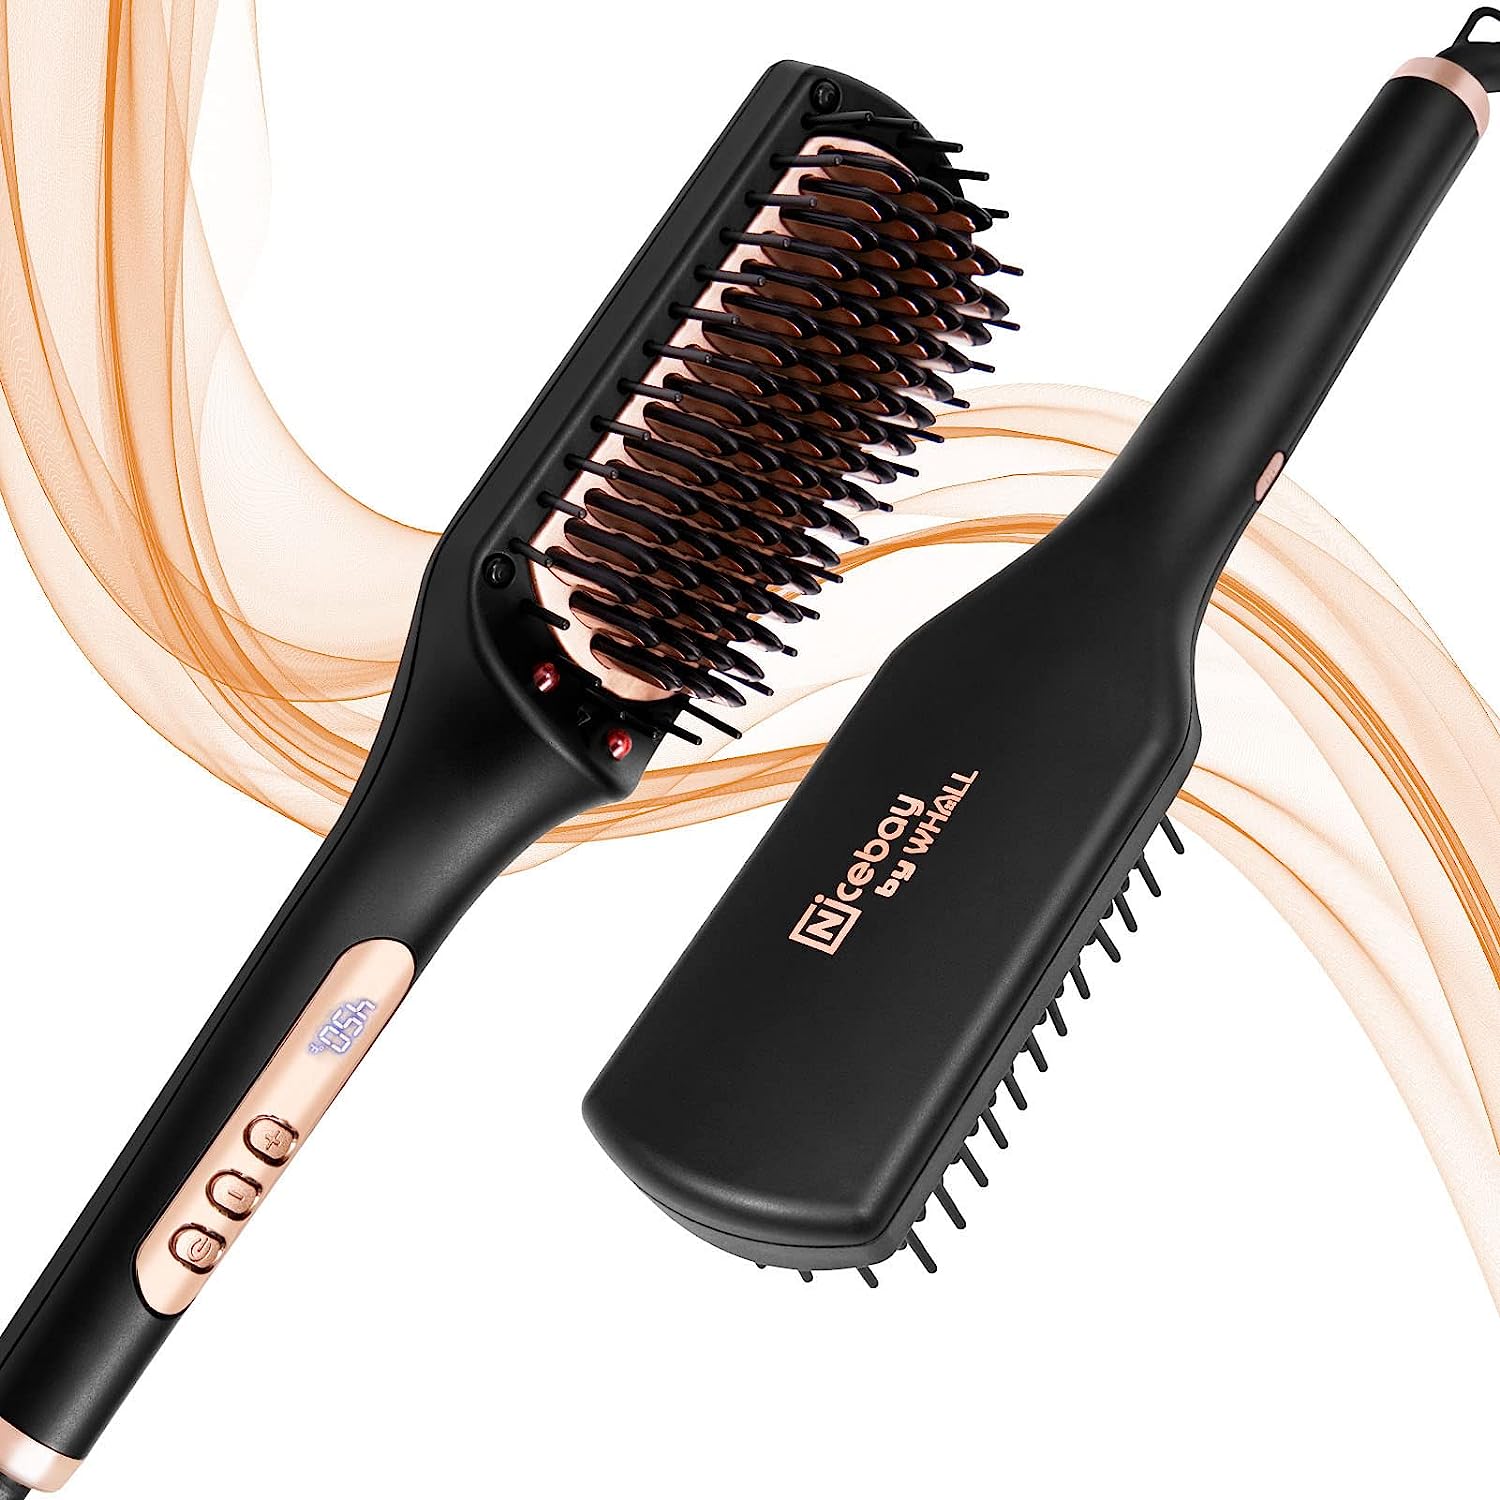 NICEBAY®HS-101 Hair Straightener Brush, Ionic Hair Straightener Comb with 6 Temp,Auto-Off & Anti-Scald & Effective Hair Care